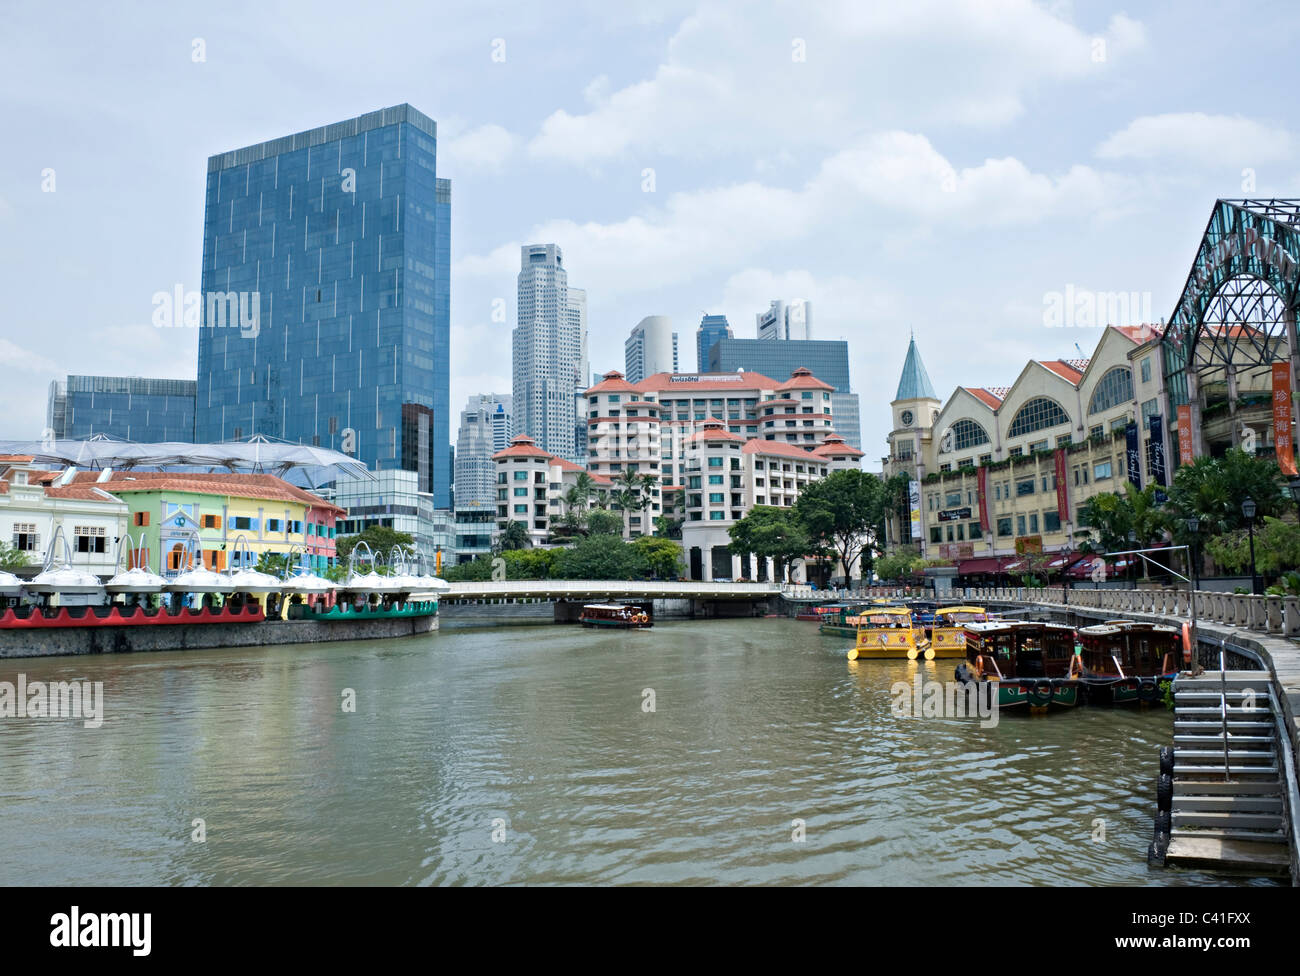 Swissotel Merchant Court with The City Skyscrapers Behind and Boats on Singapore River near Clarke Quay Republic of Singapore Stock Photo